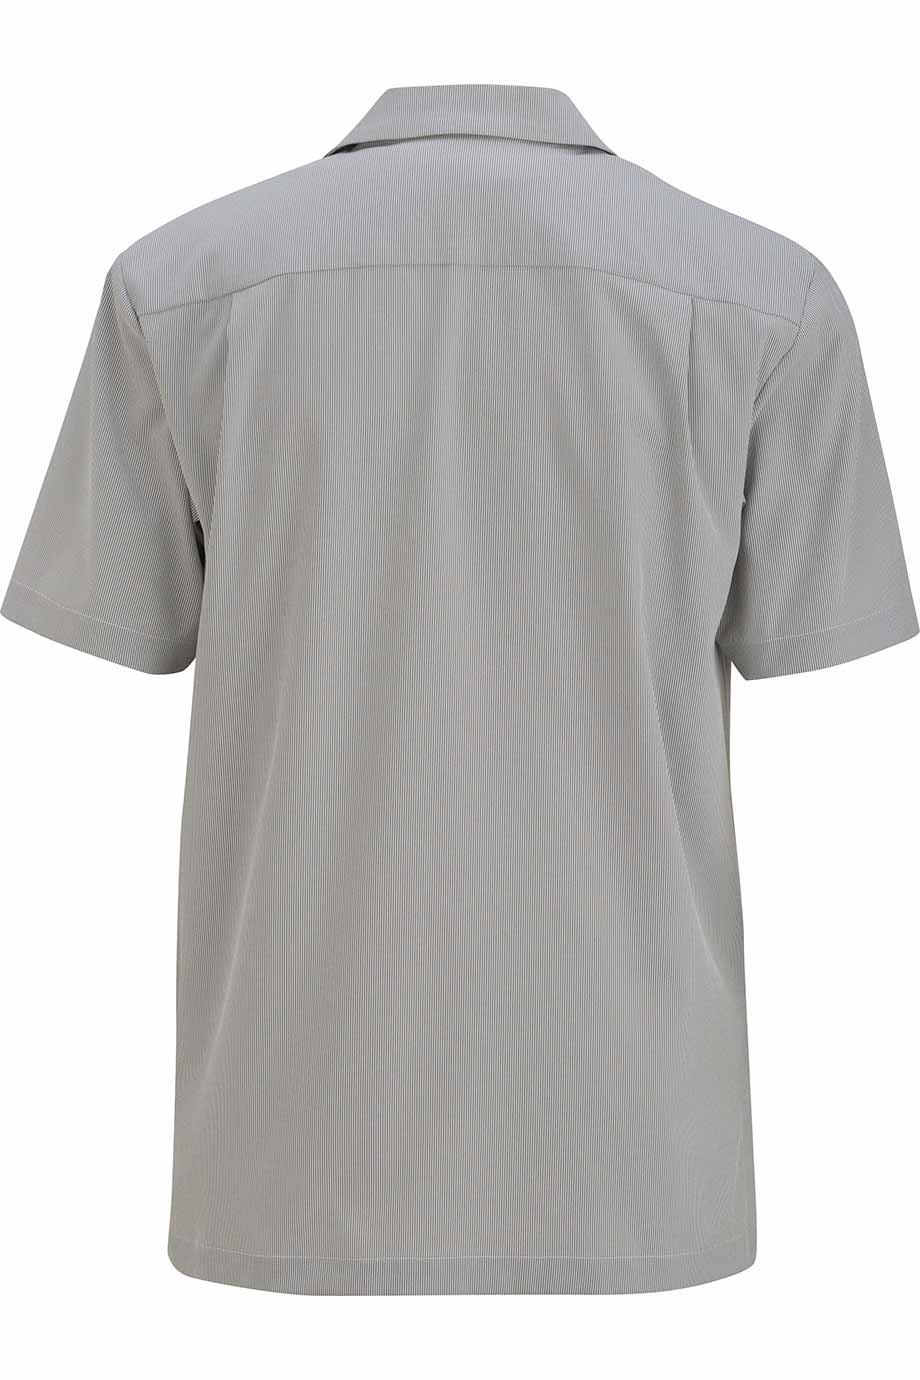 Men's Housekeeping Button-Down, Steel Grey [Left Chest / VCL Full Color]